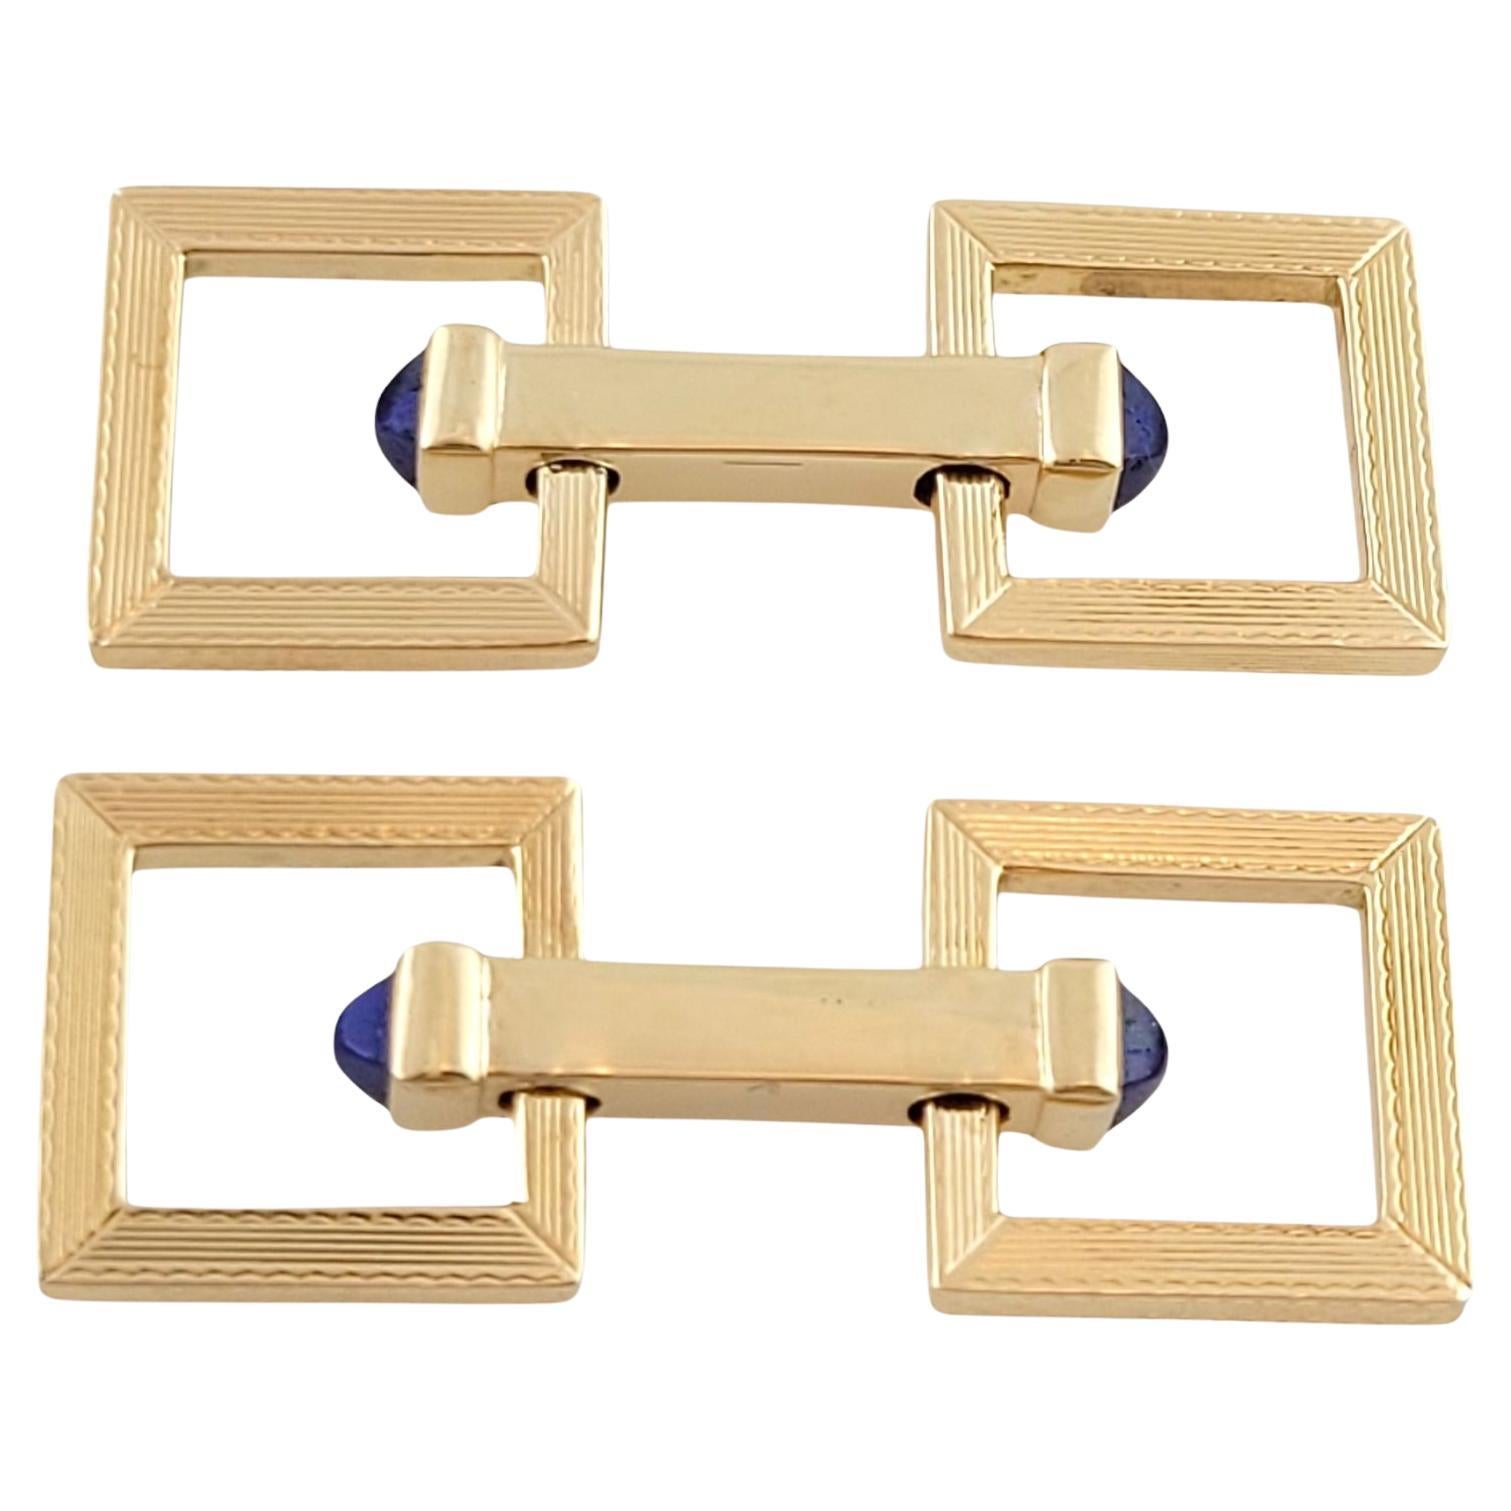 14K Yellow Gold Cufflinks with Blue Stones